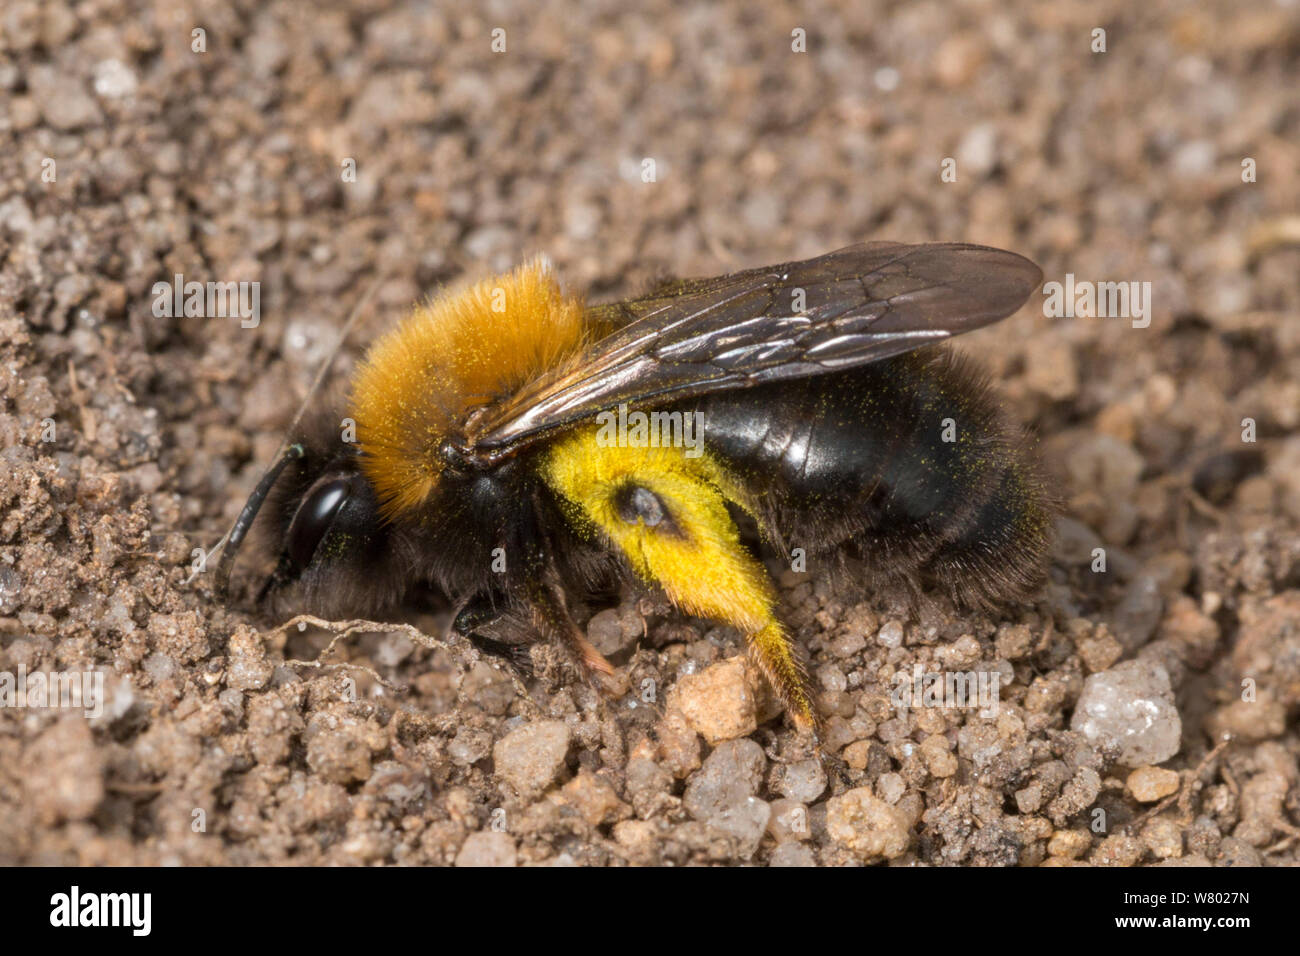 Mining Bee (Andrena clarkella) female excavating nest in sandy soil. Note the pollen hairs coated in yellow pollen from Goat willow (Salix caprea), an important food source for pollinators in early spring. Peak District National Park, Derbyshire, UK. April. Stock Photo